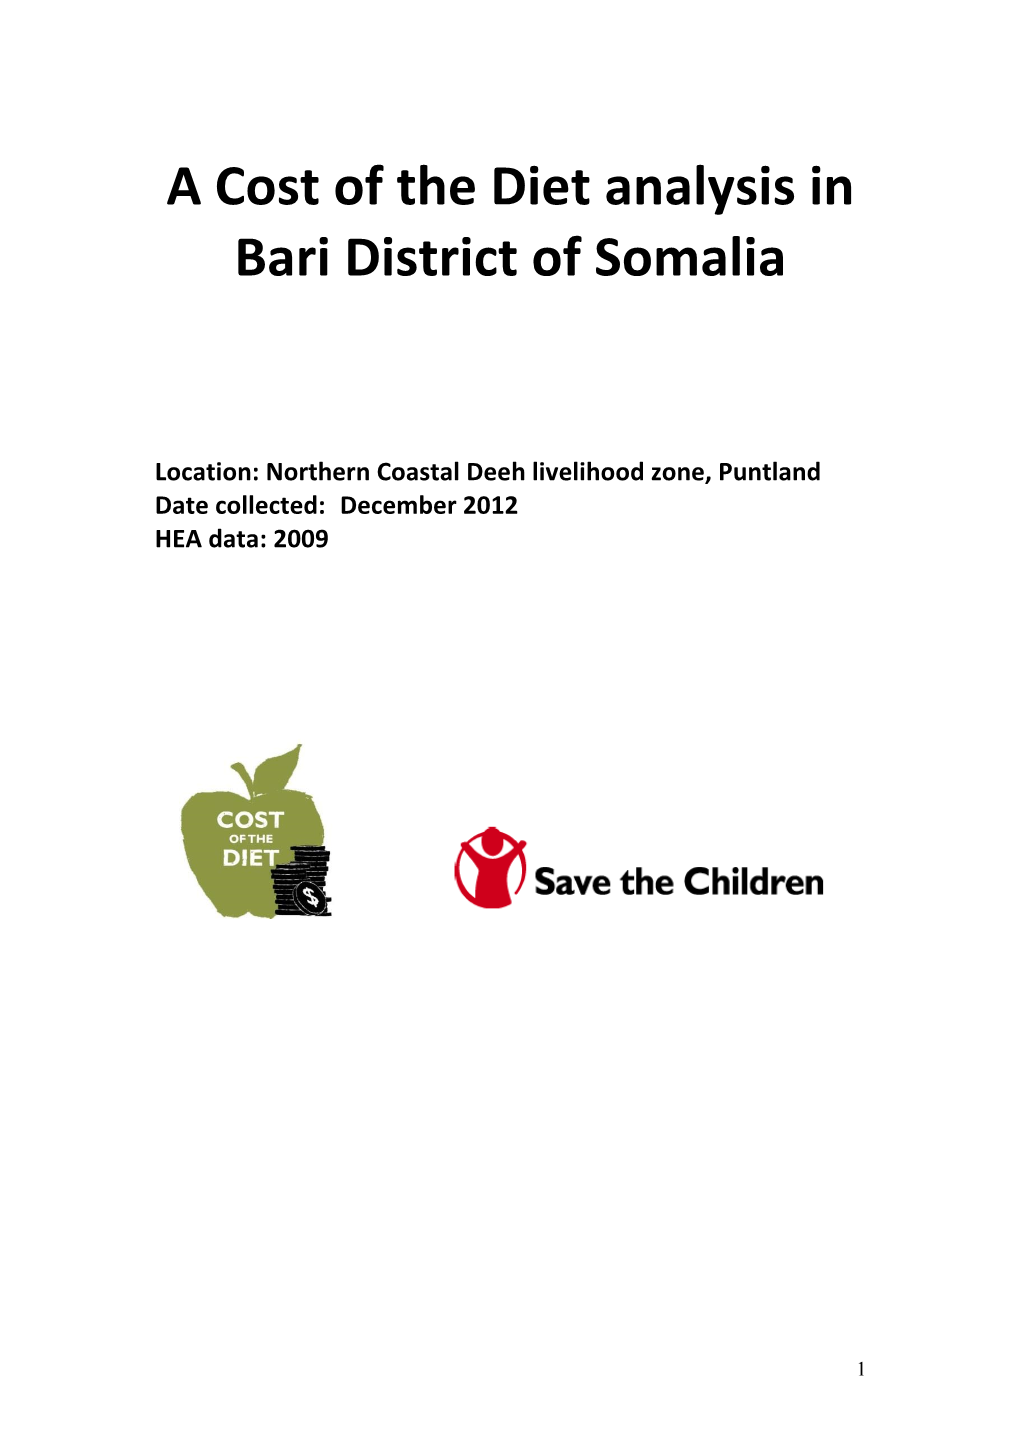 A Cost of the Diet Analysis in Bari District of Somalia